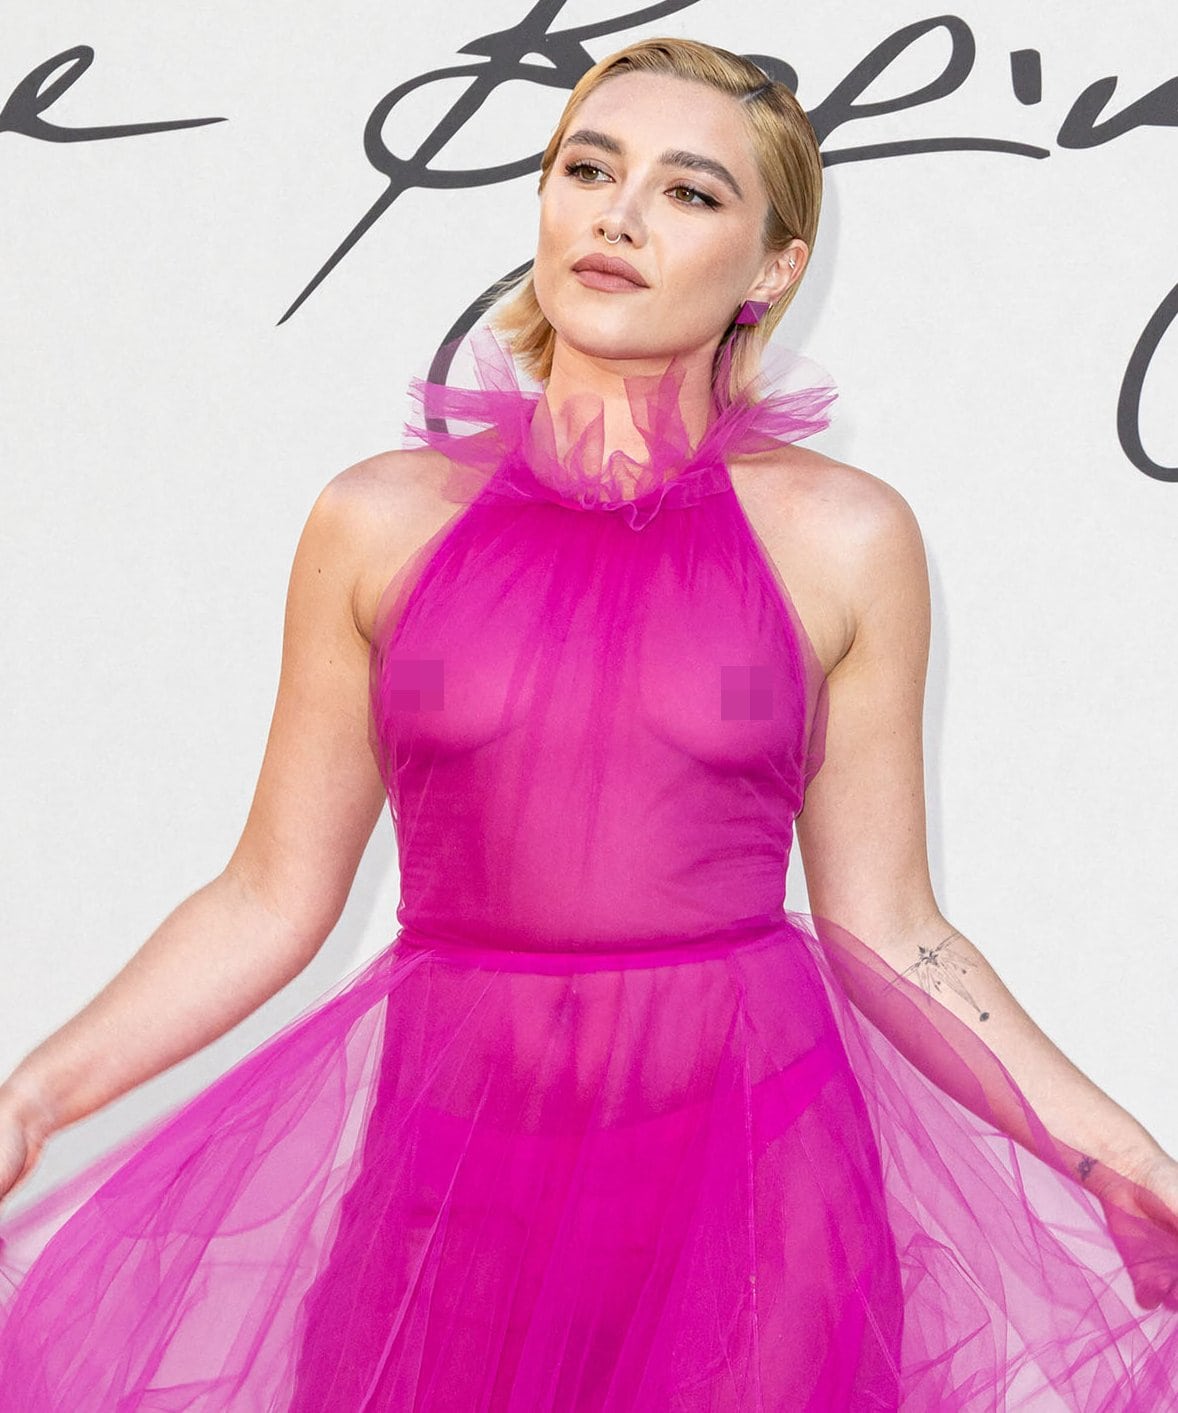 Florence Pugh wears her hair in a slick side-swept hairstyle and complements her pink gown with light pink eyeshadow and matte lipstick